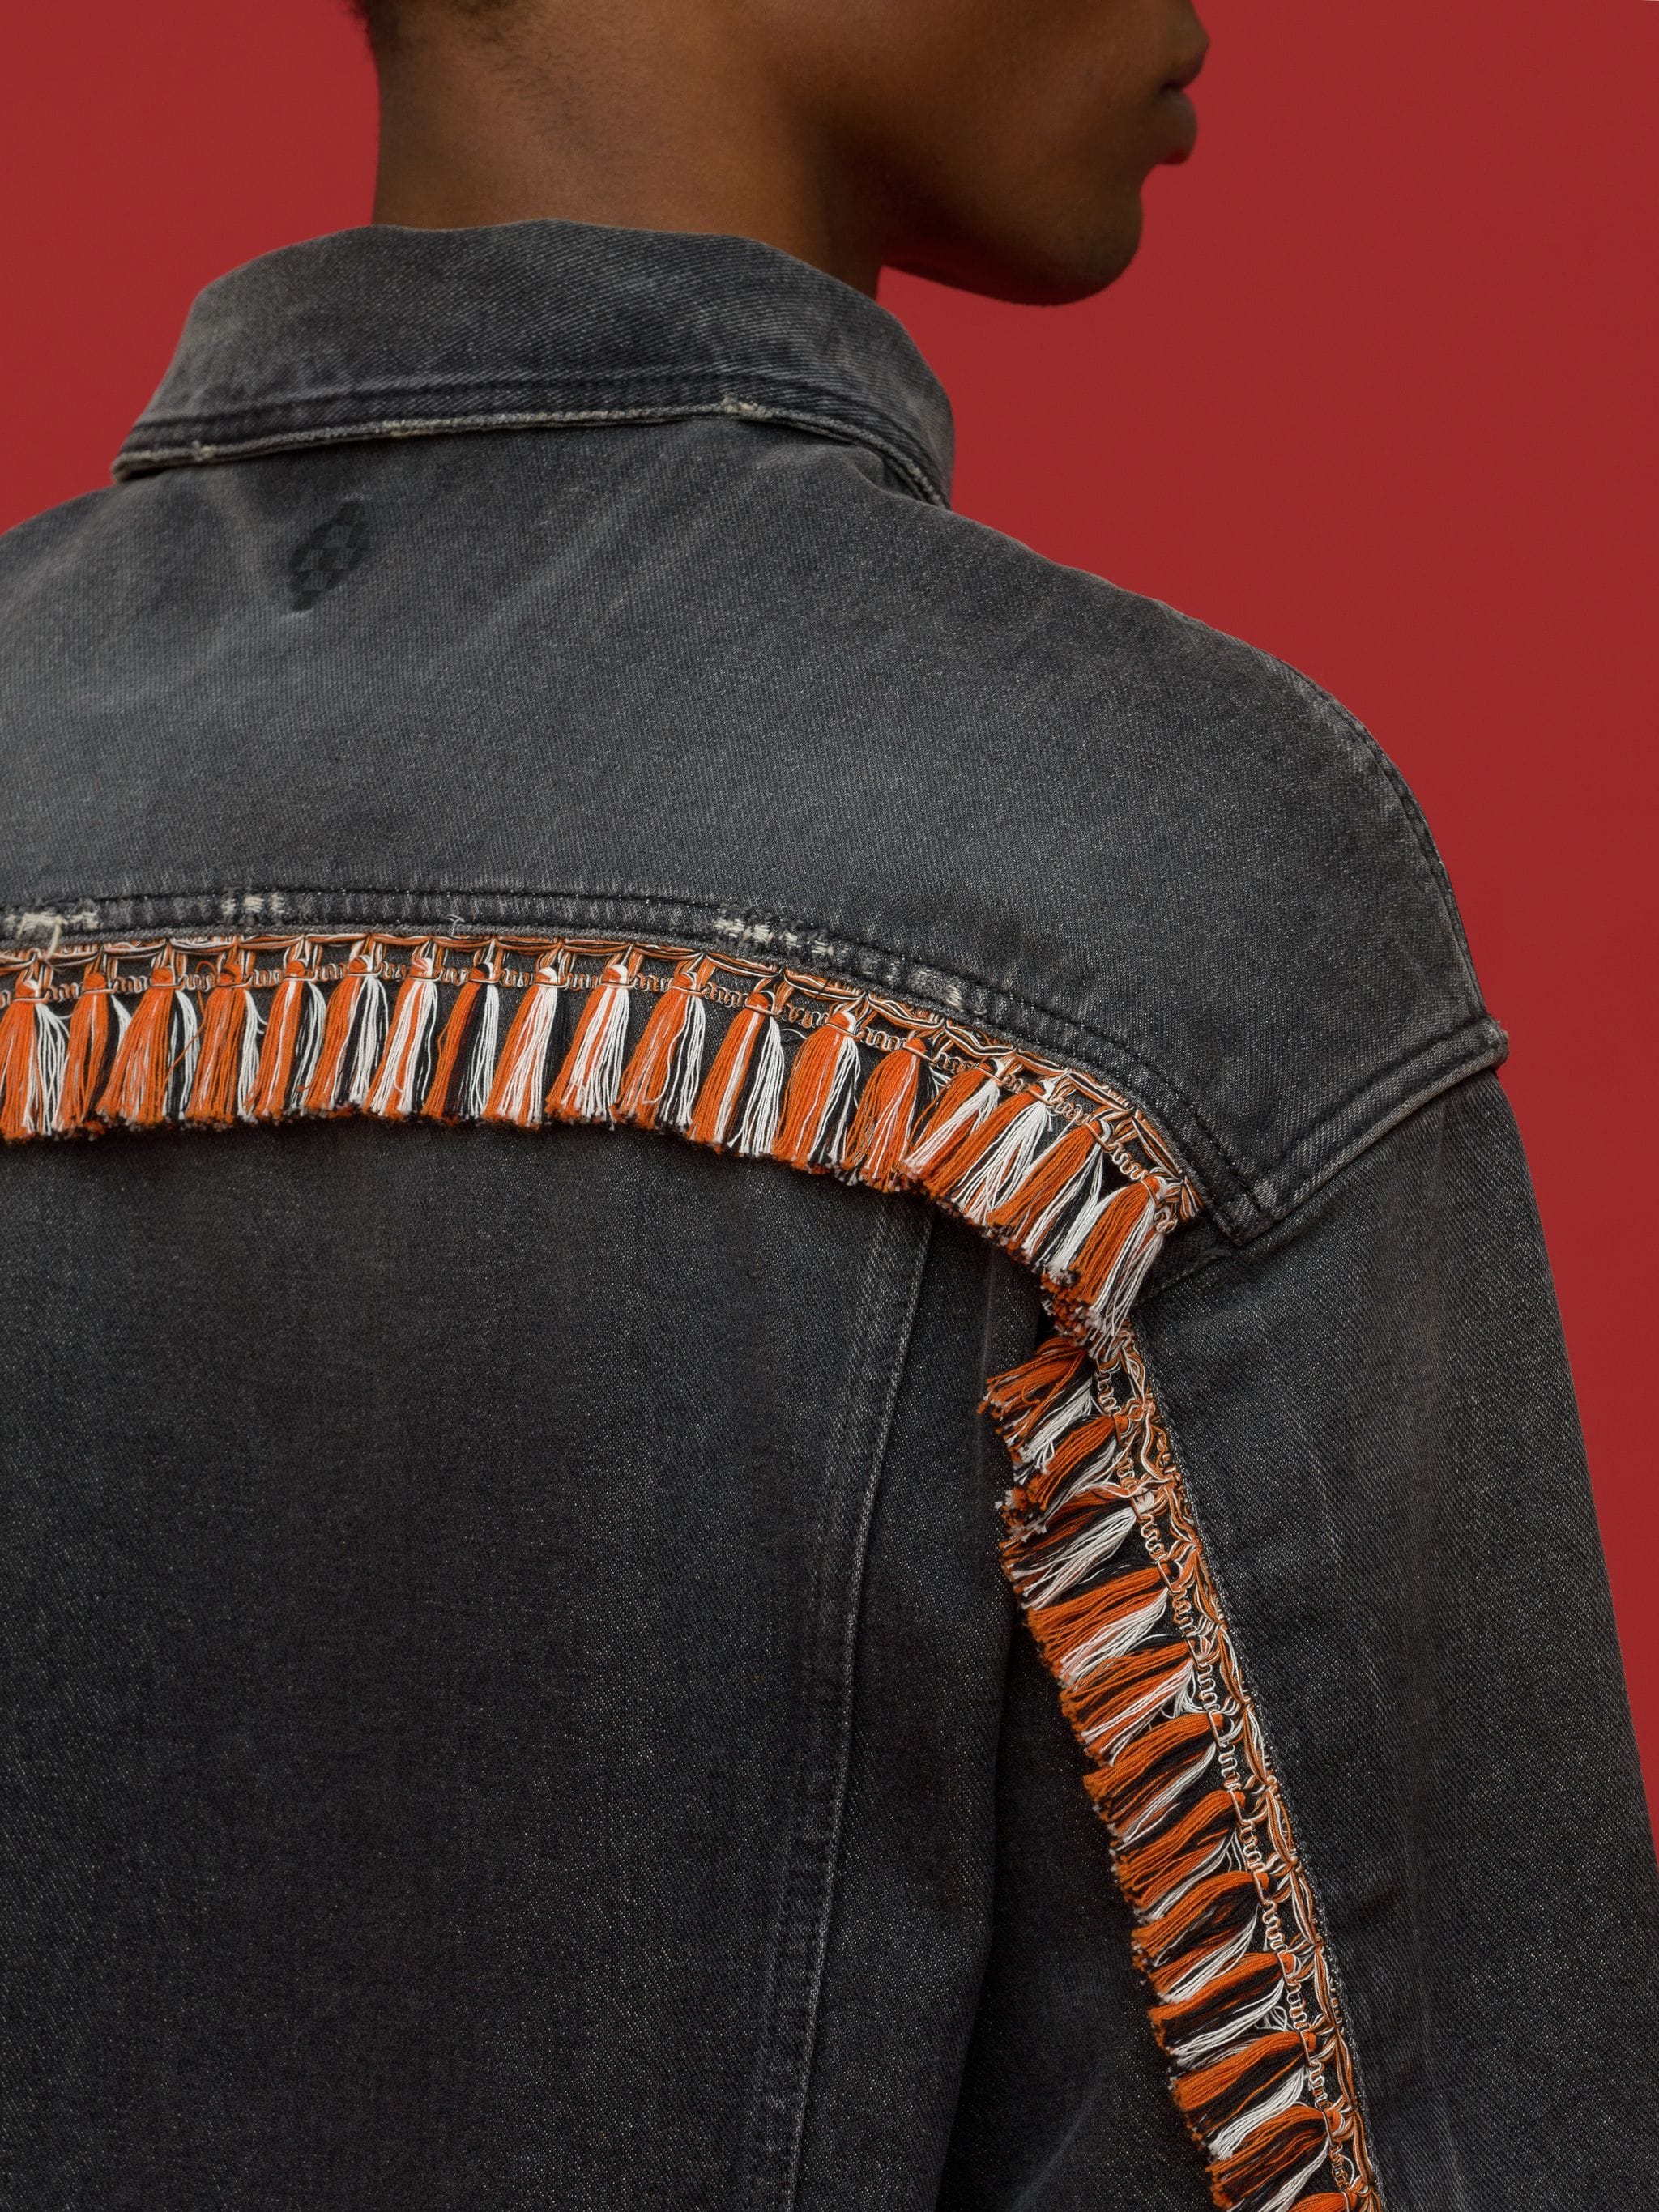 tassel-detail denim jacket from Marcelo Burlon County of Milan featuring black, orange, tassel detail, logo patch to the rear, classic collar, front button fastening, two chest patch pockets, two side slit pockets, long sleeves and straight hem.